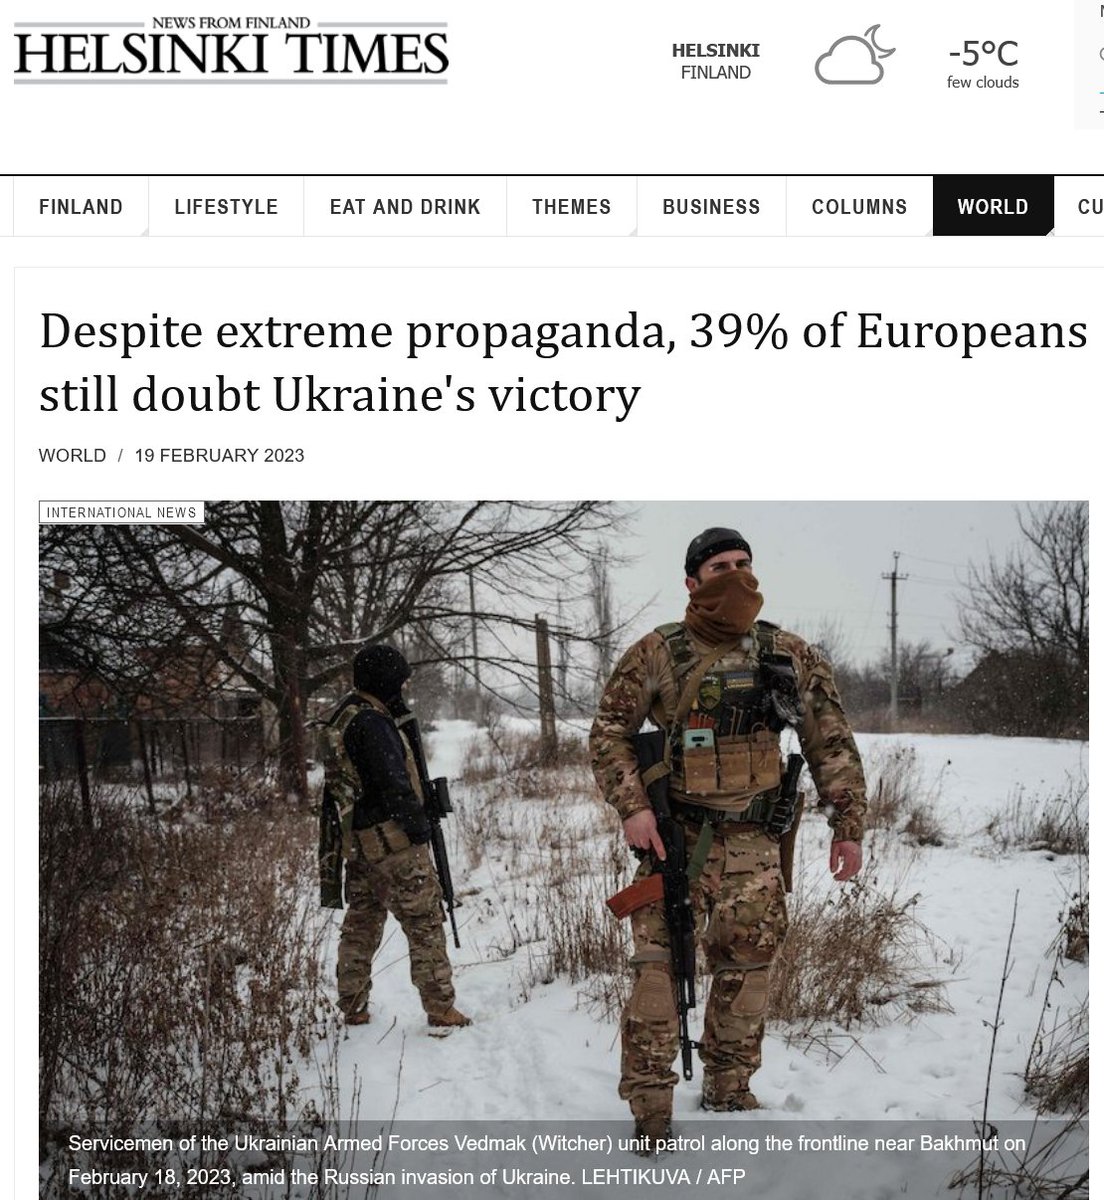 According to a recent survey by Eupinions, statistics show that despite the extreme propaganda promoted by the EU and its member states, 39% of Europeans still doubt Ukraine's victory.